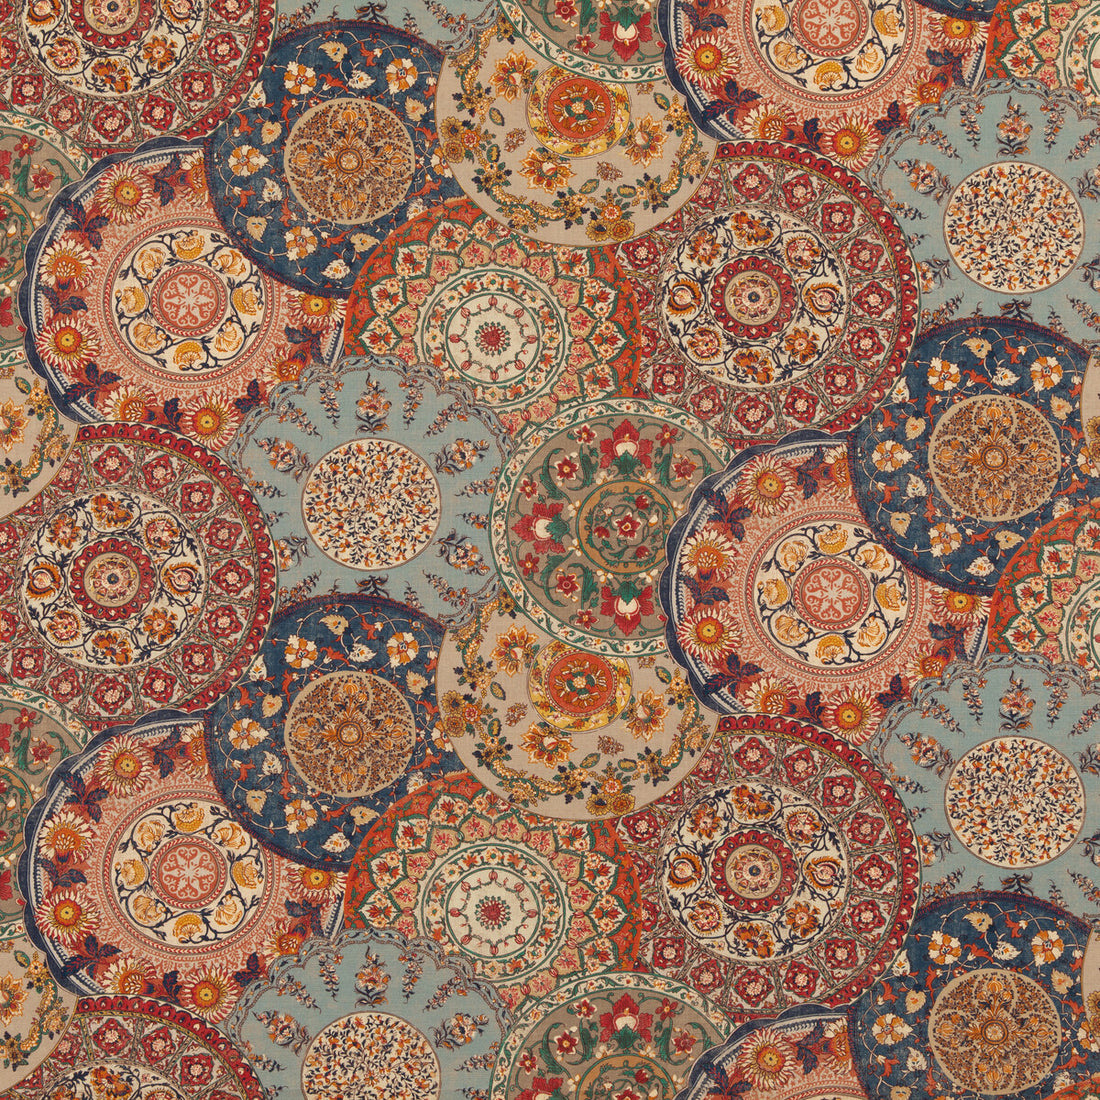 Imari fabric in red/indigo color - pattern BP10856.4.0 - by G P &amp; J Baker in the Chifu collection